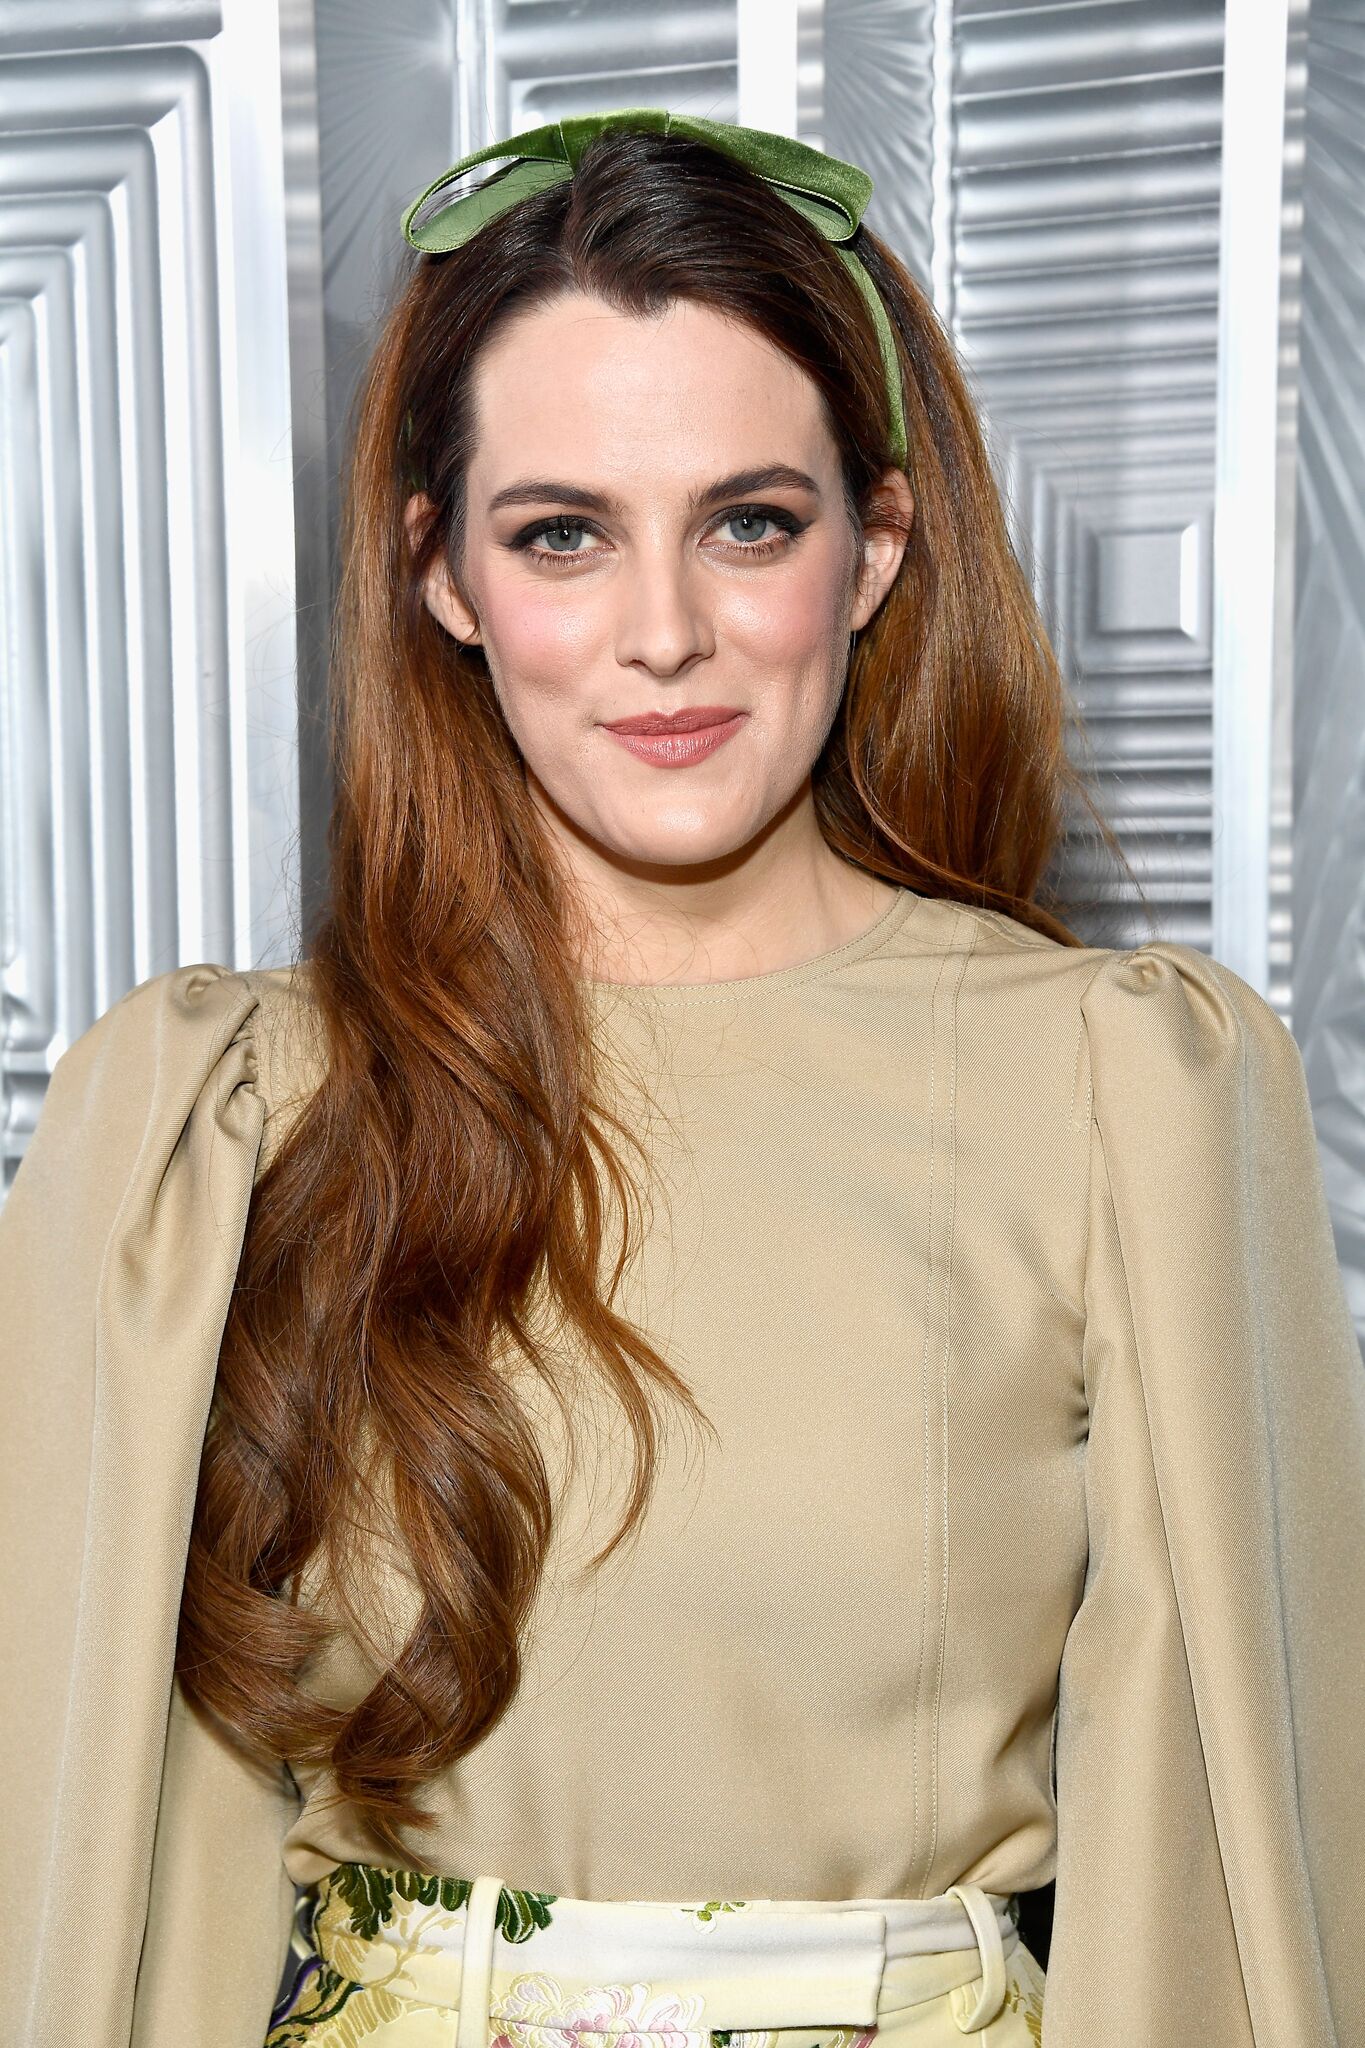 Riley Keough attends ELLE's 24th Annual Women in Hollywood Celebration presented by L'Oreal Paris, Real Is Rare, Real Is A Diamond and CALVIN KLEIN at Four Seasons Hotel Los Angeles | Getty Images